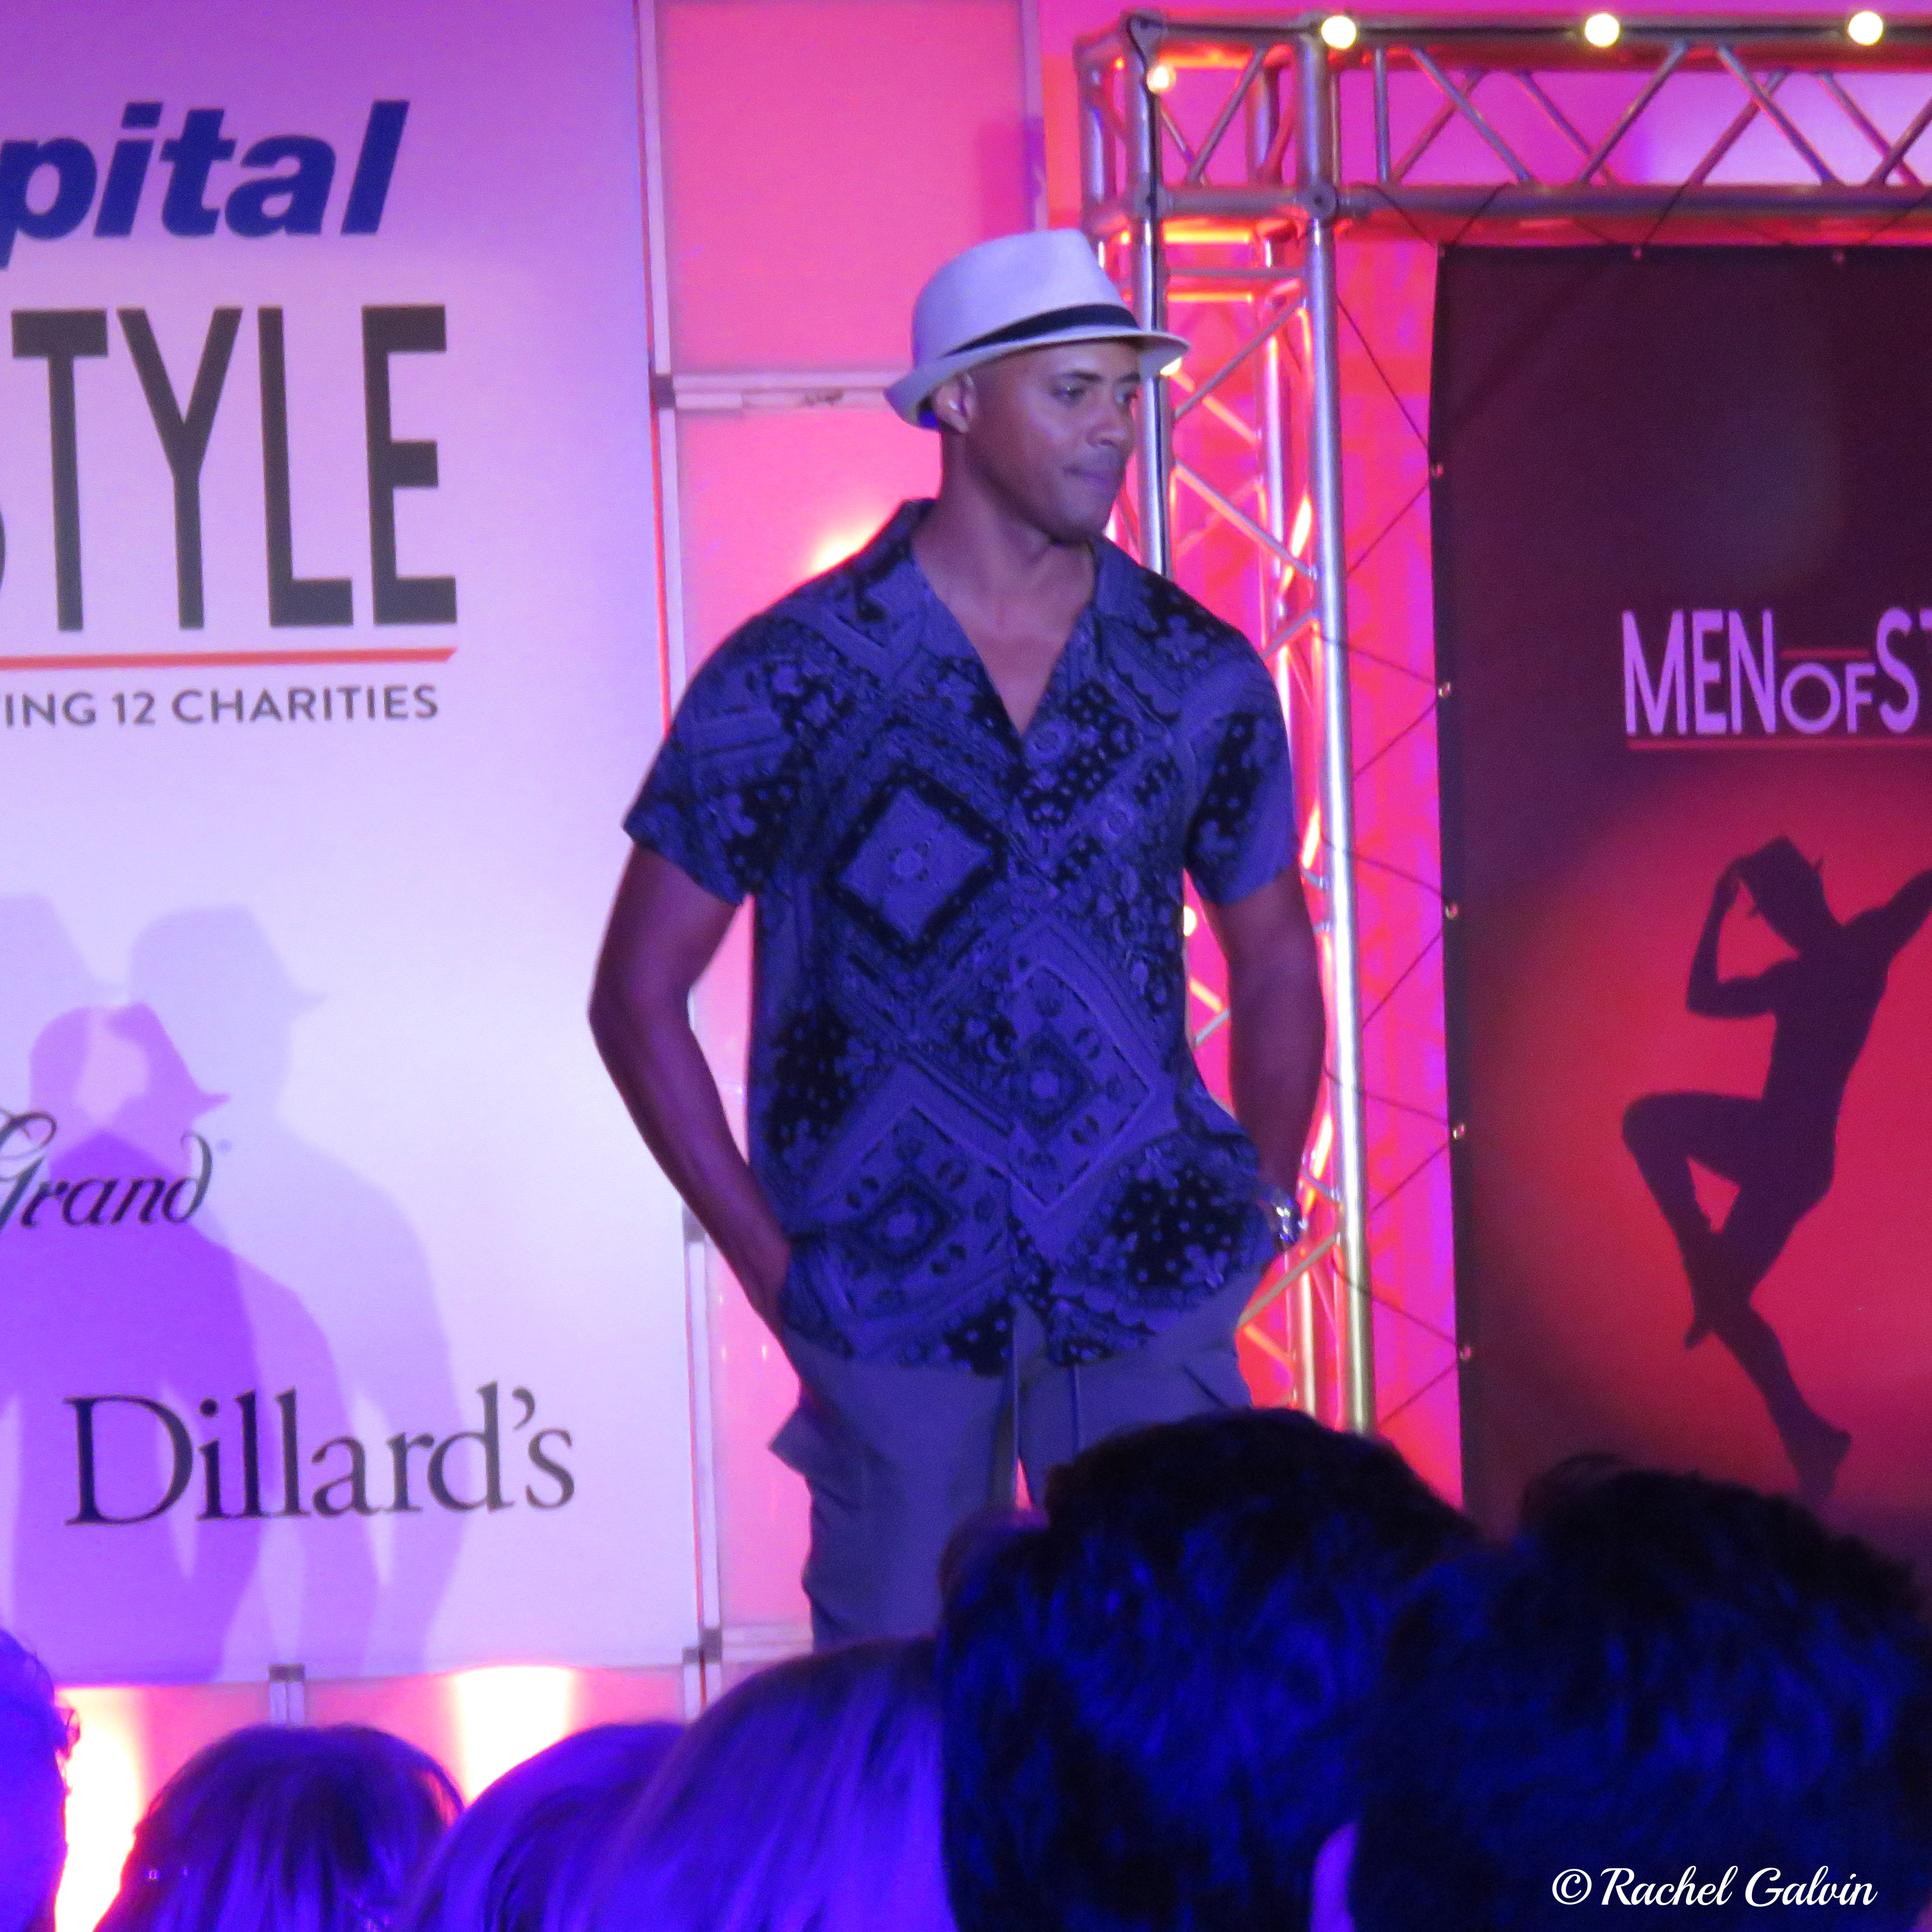 Men of Style Rocked the Runway